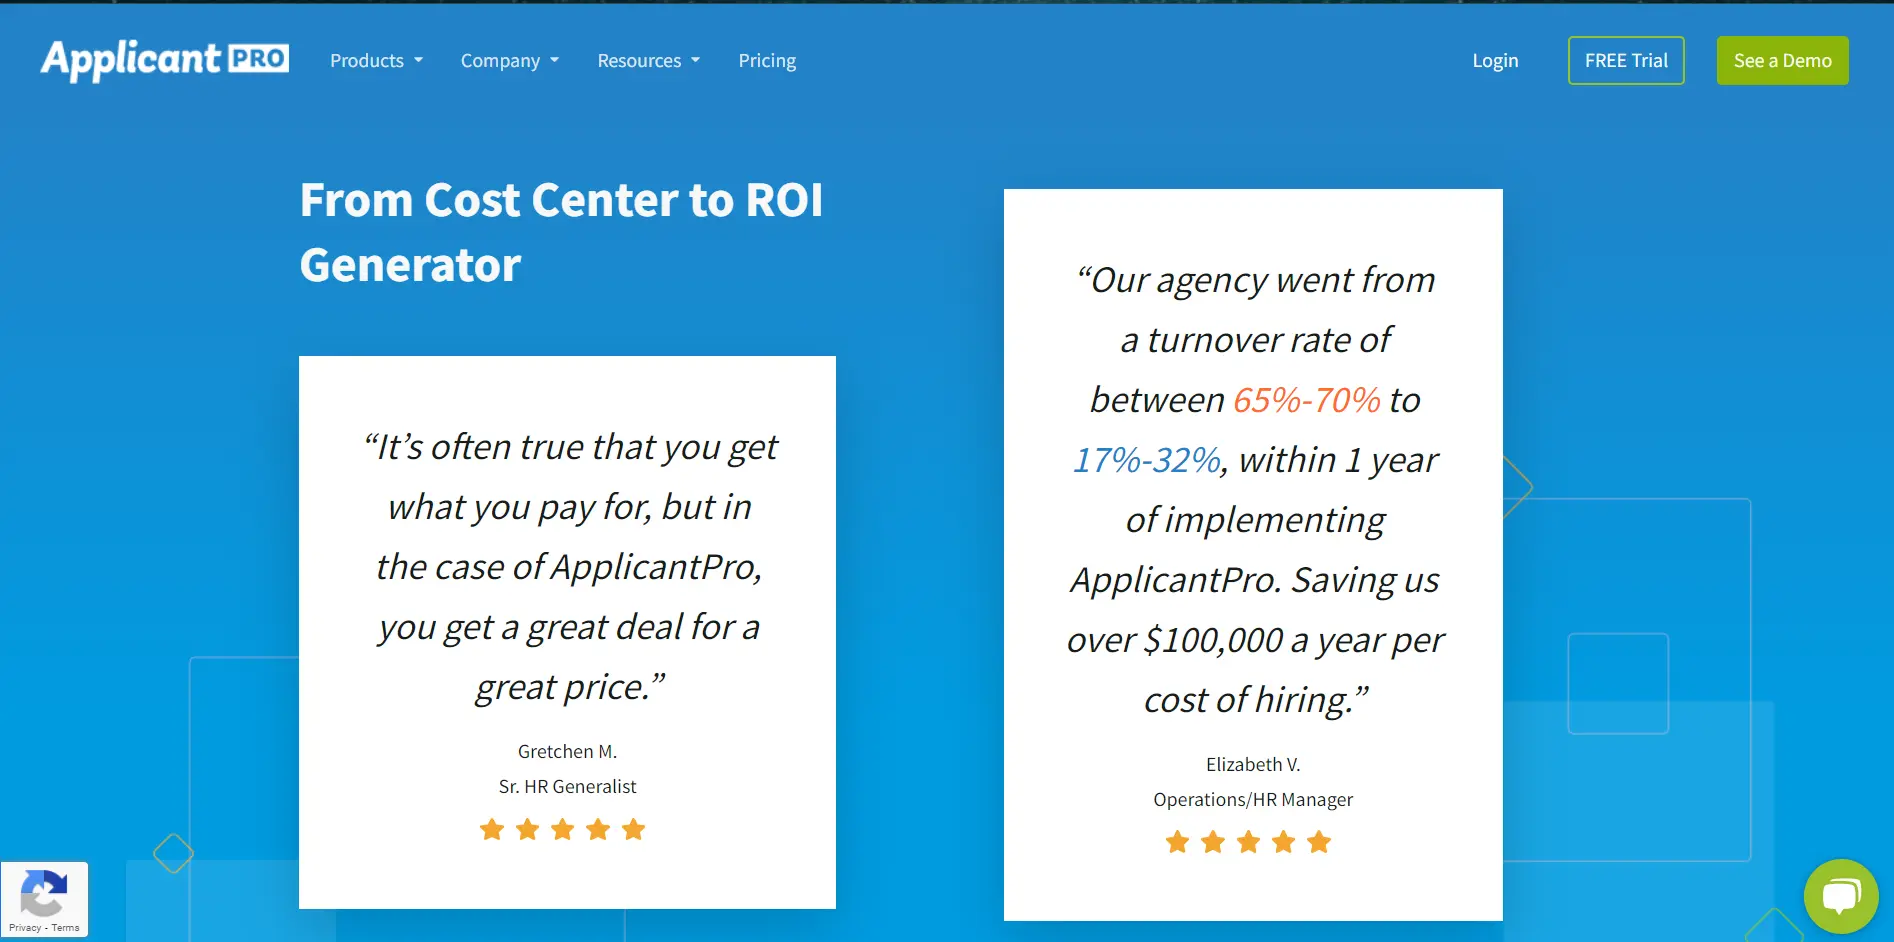 Two positive reviews from customers of ApplicantPro